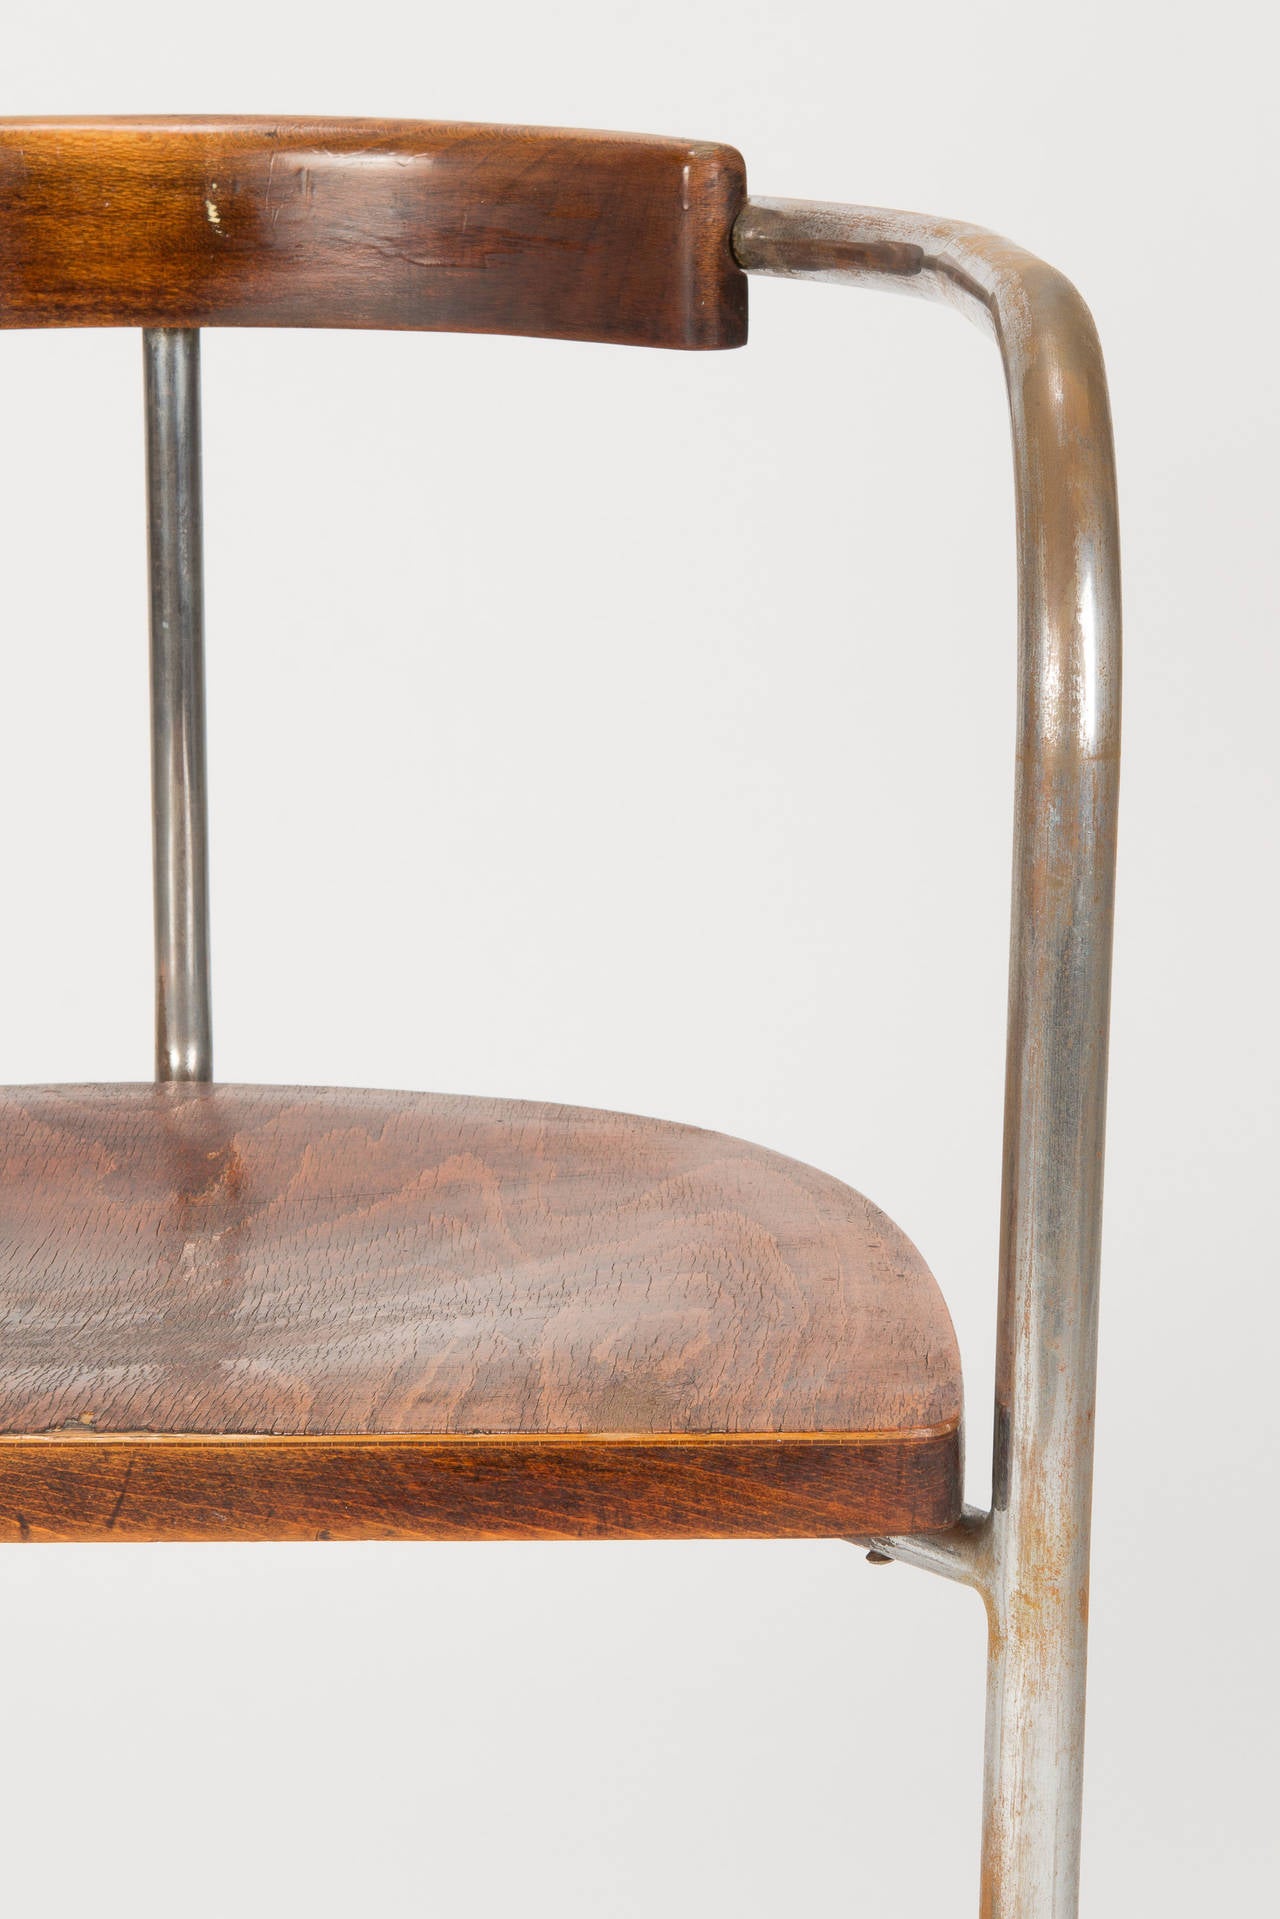 Antique Bauhaus Steel Tube Cantilever Chair, Italy, 1930s In Good Condition For Sale In Basel, CH